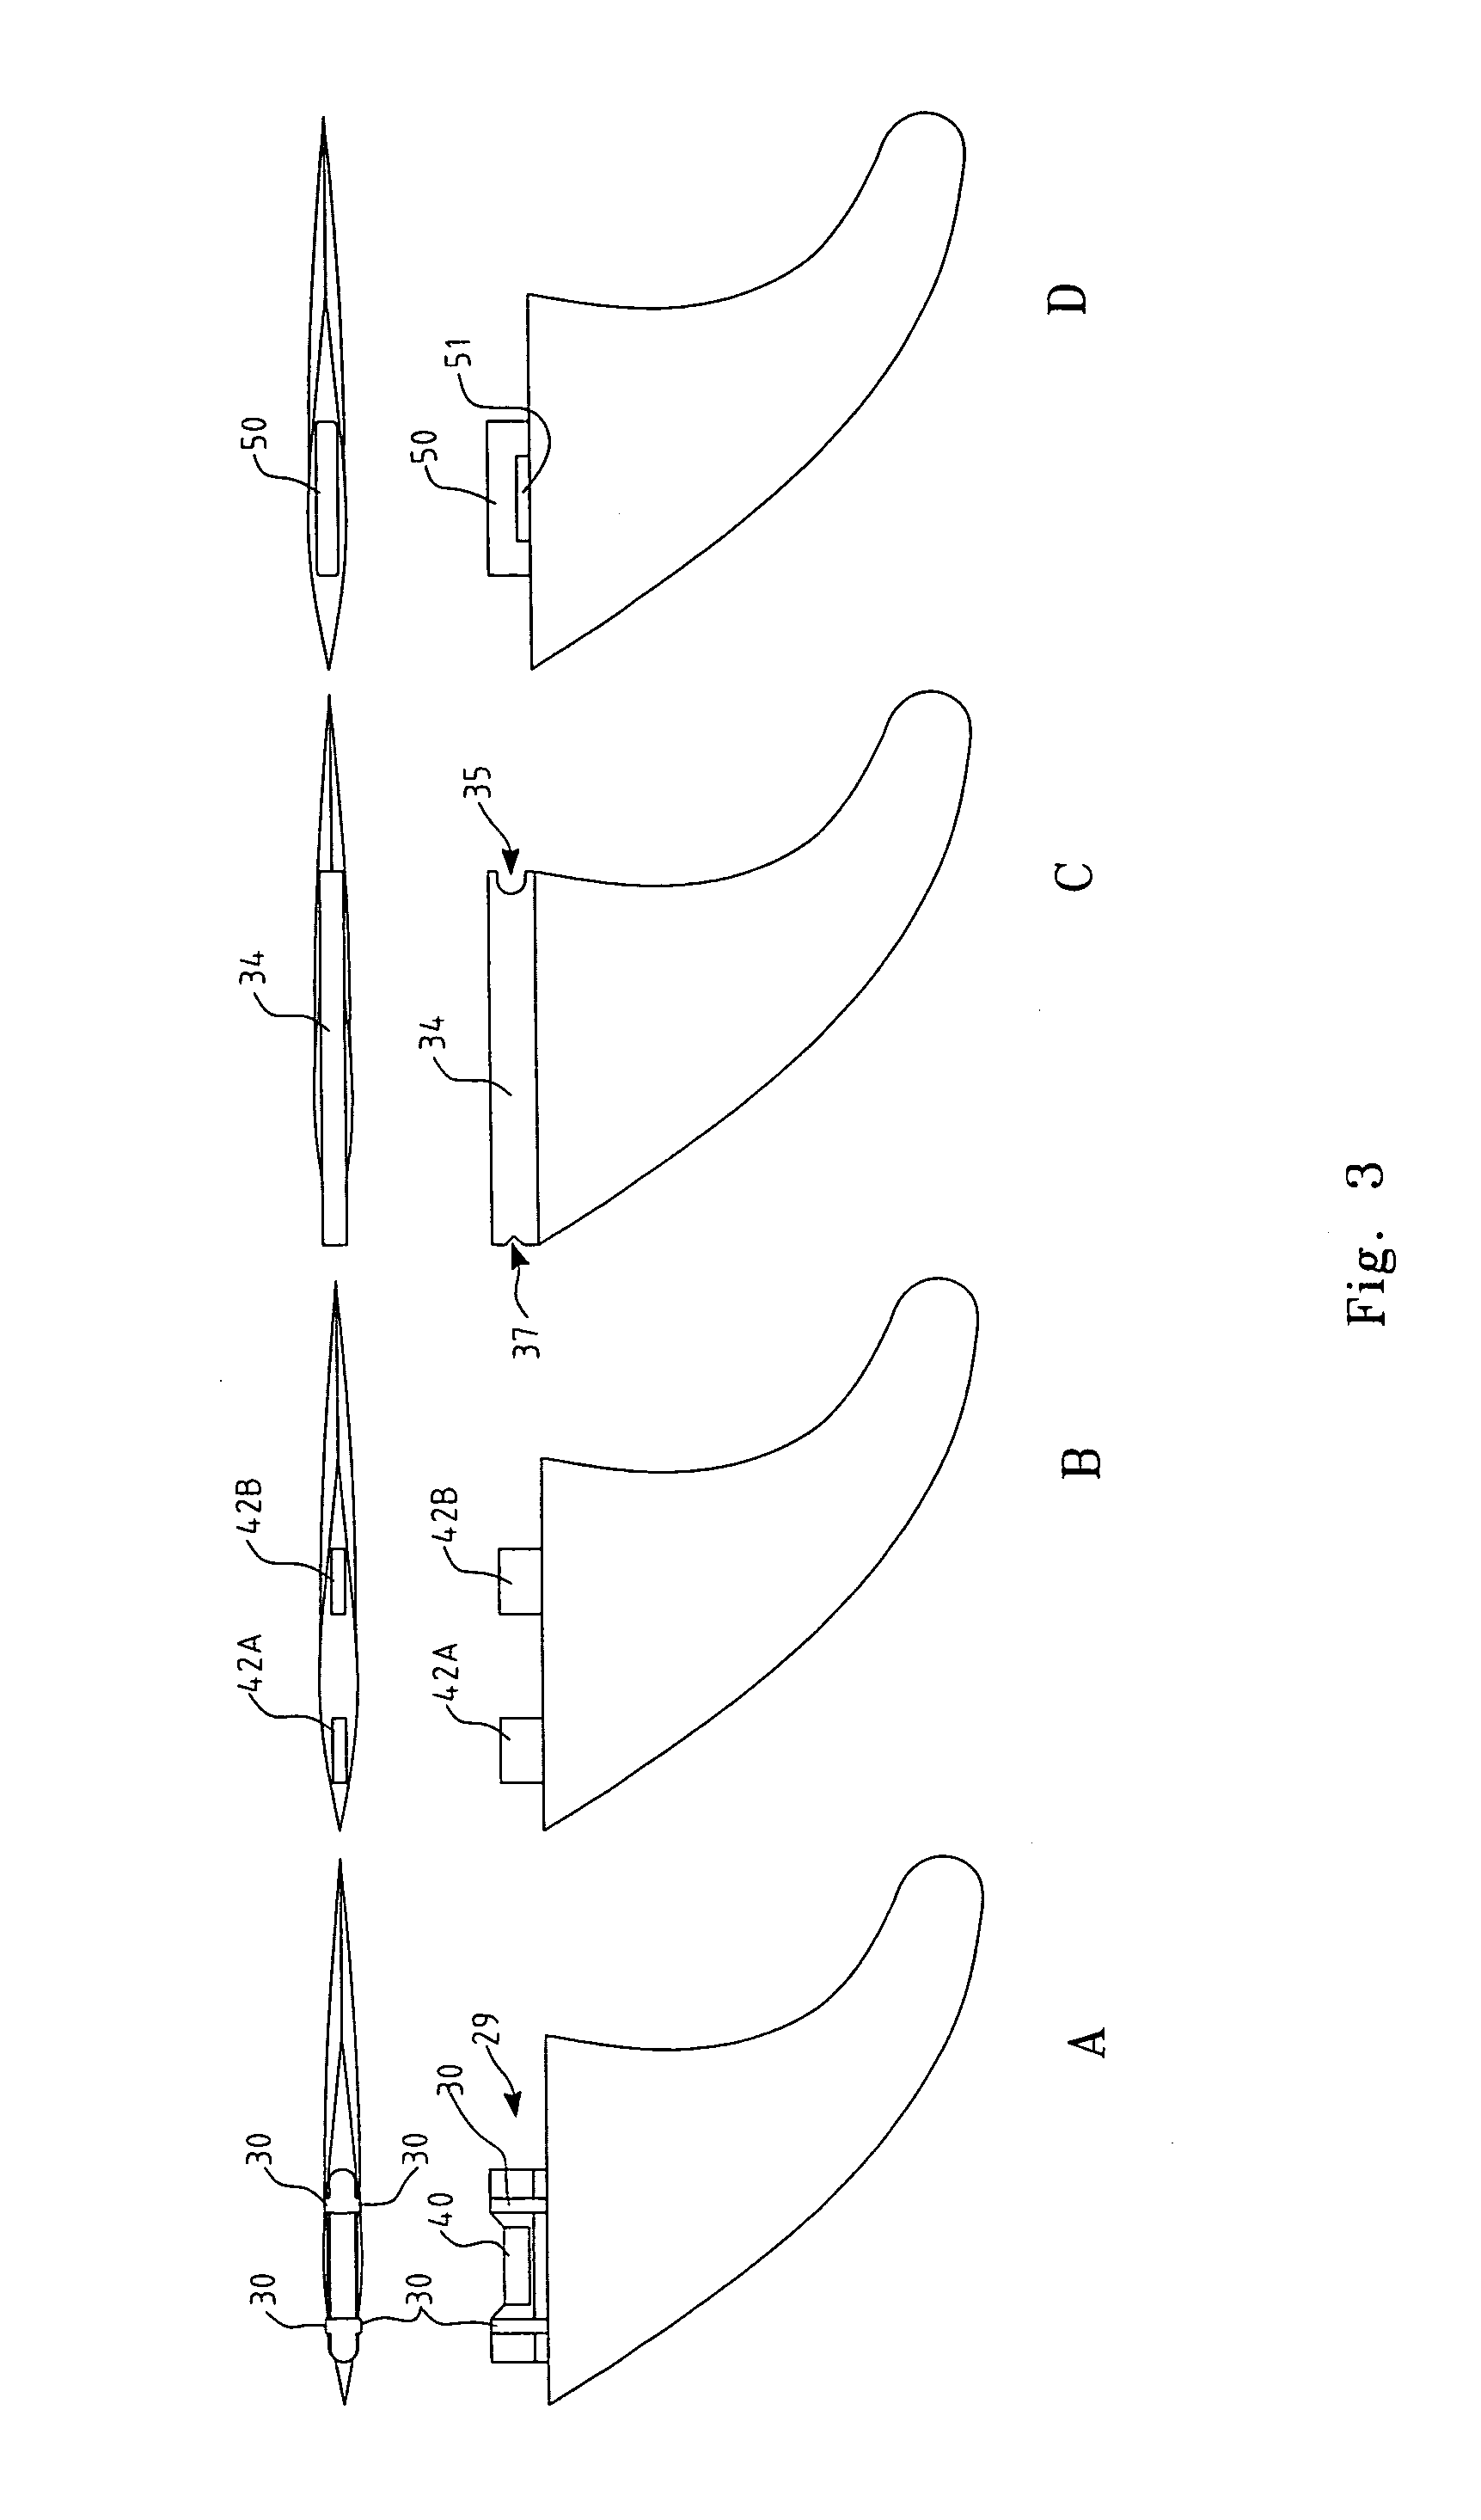 Fin attachment system and method